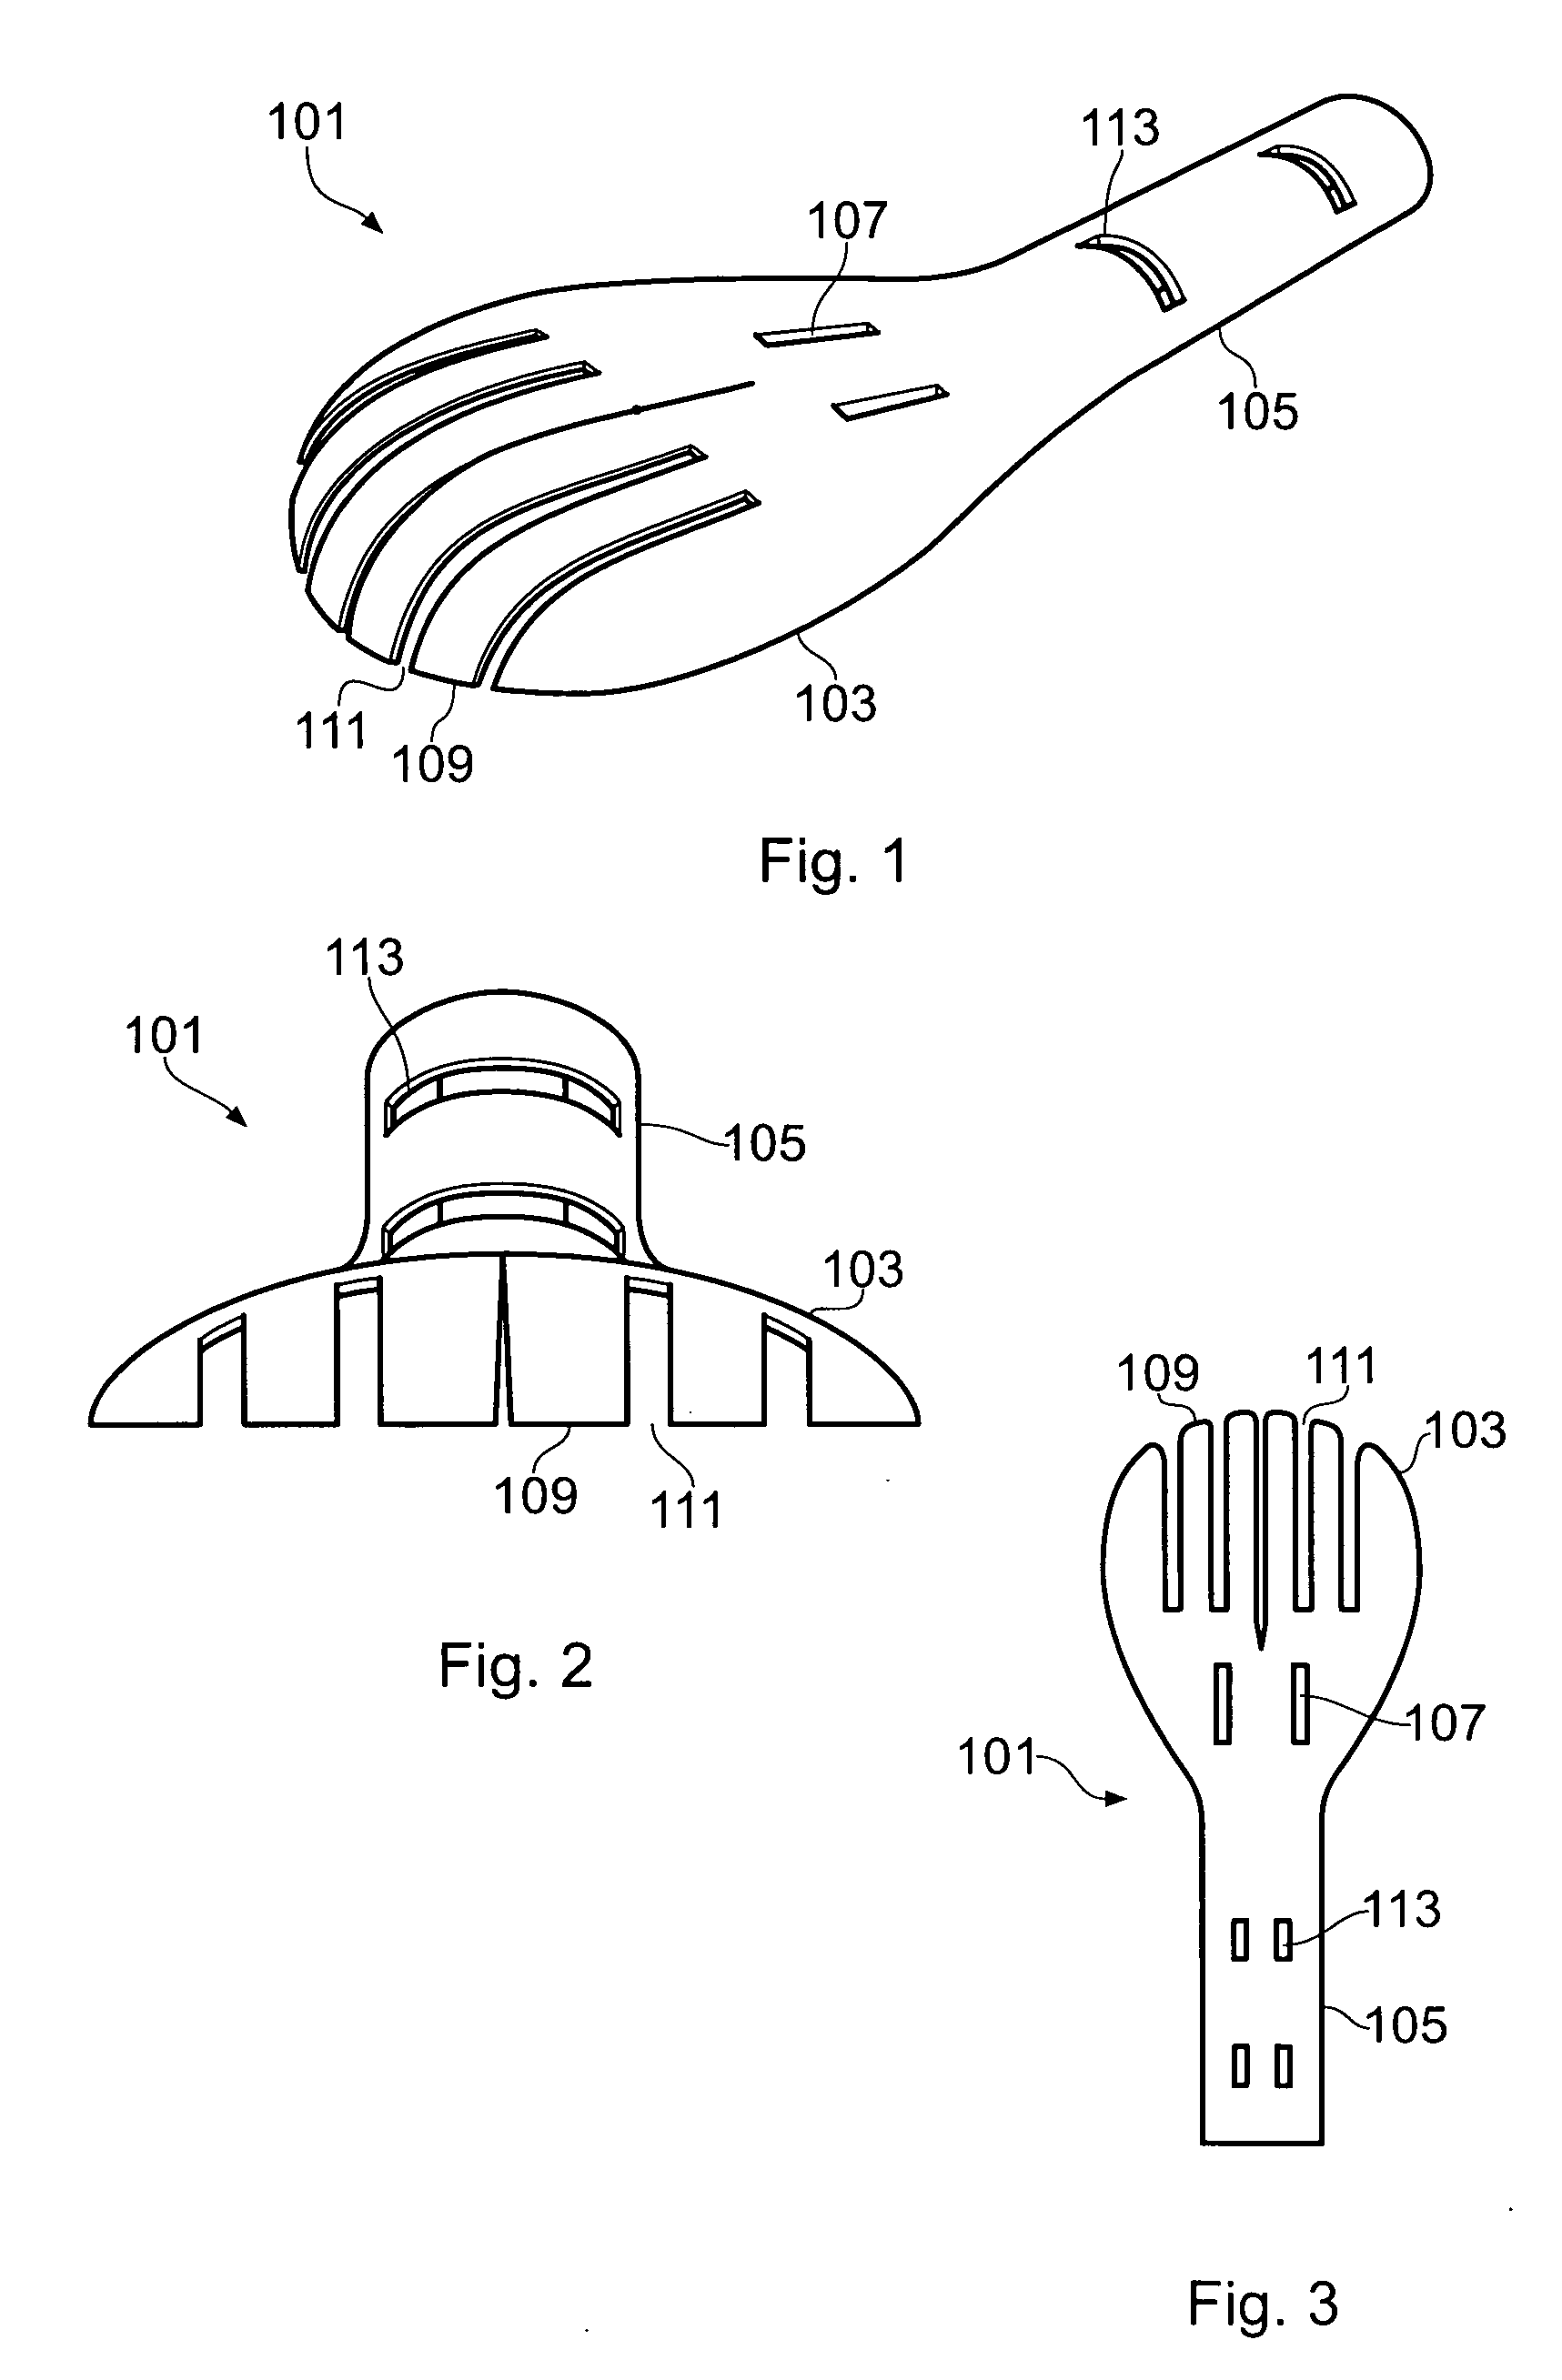 Garment support device